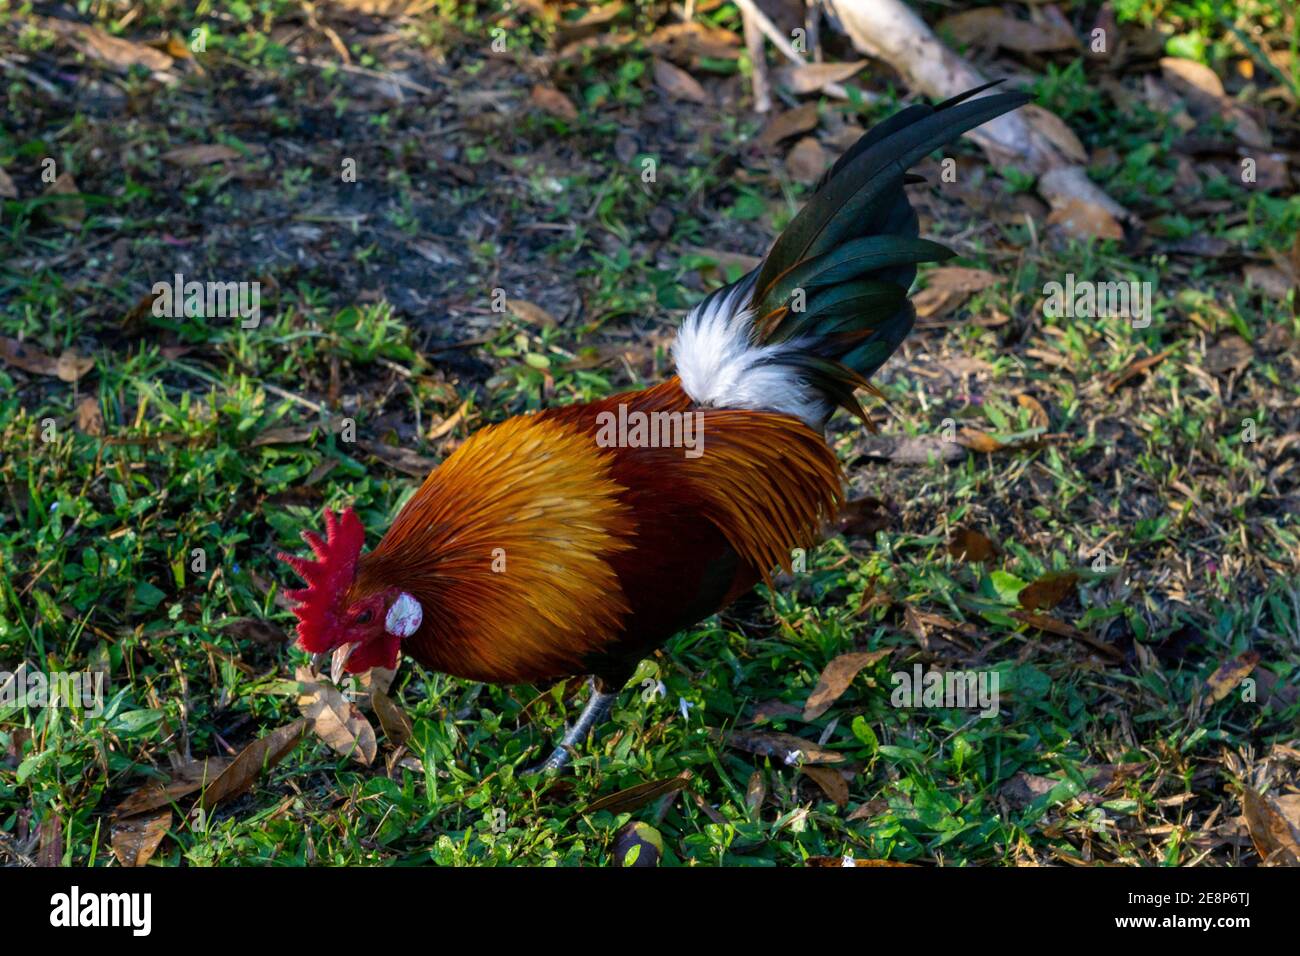 Male Red Junglefowl (Gallus gallus, domestic chicken ancestor) rooster walking on the ground, Steven J. Fousek Preserve, St. Lucie County, Florida Stock Photo